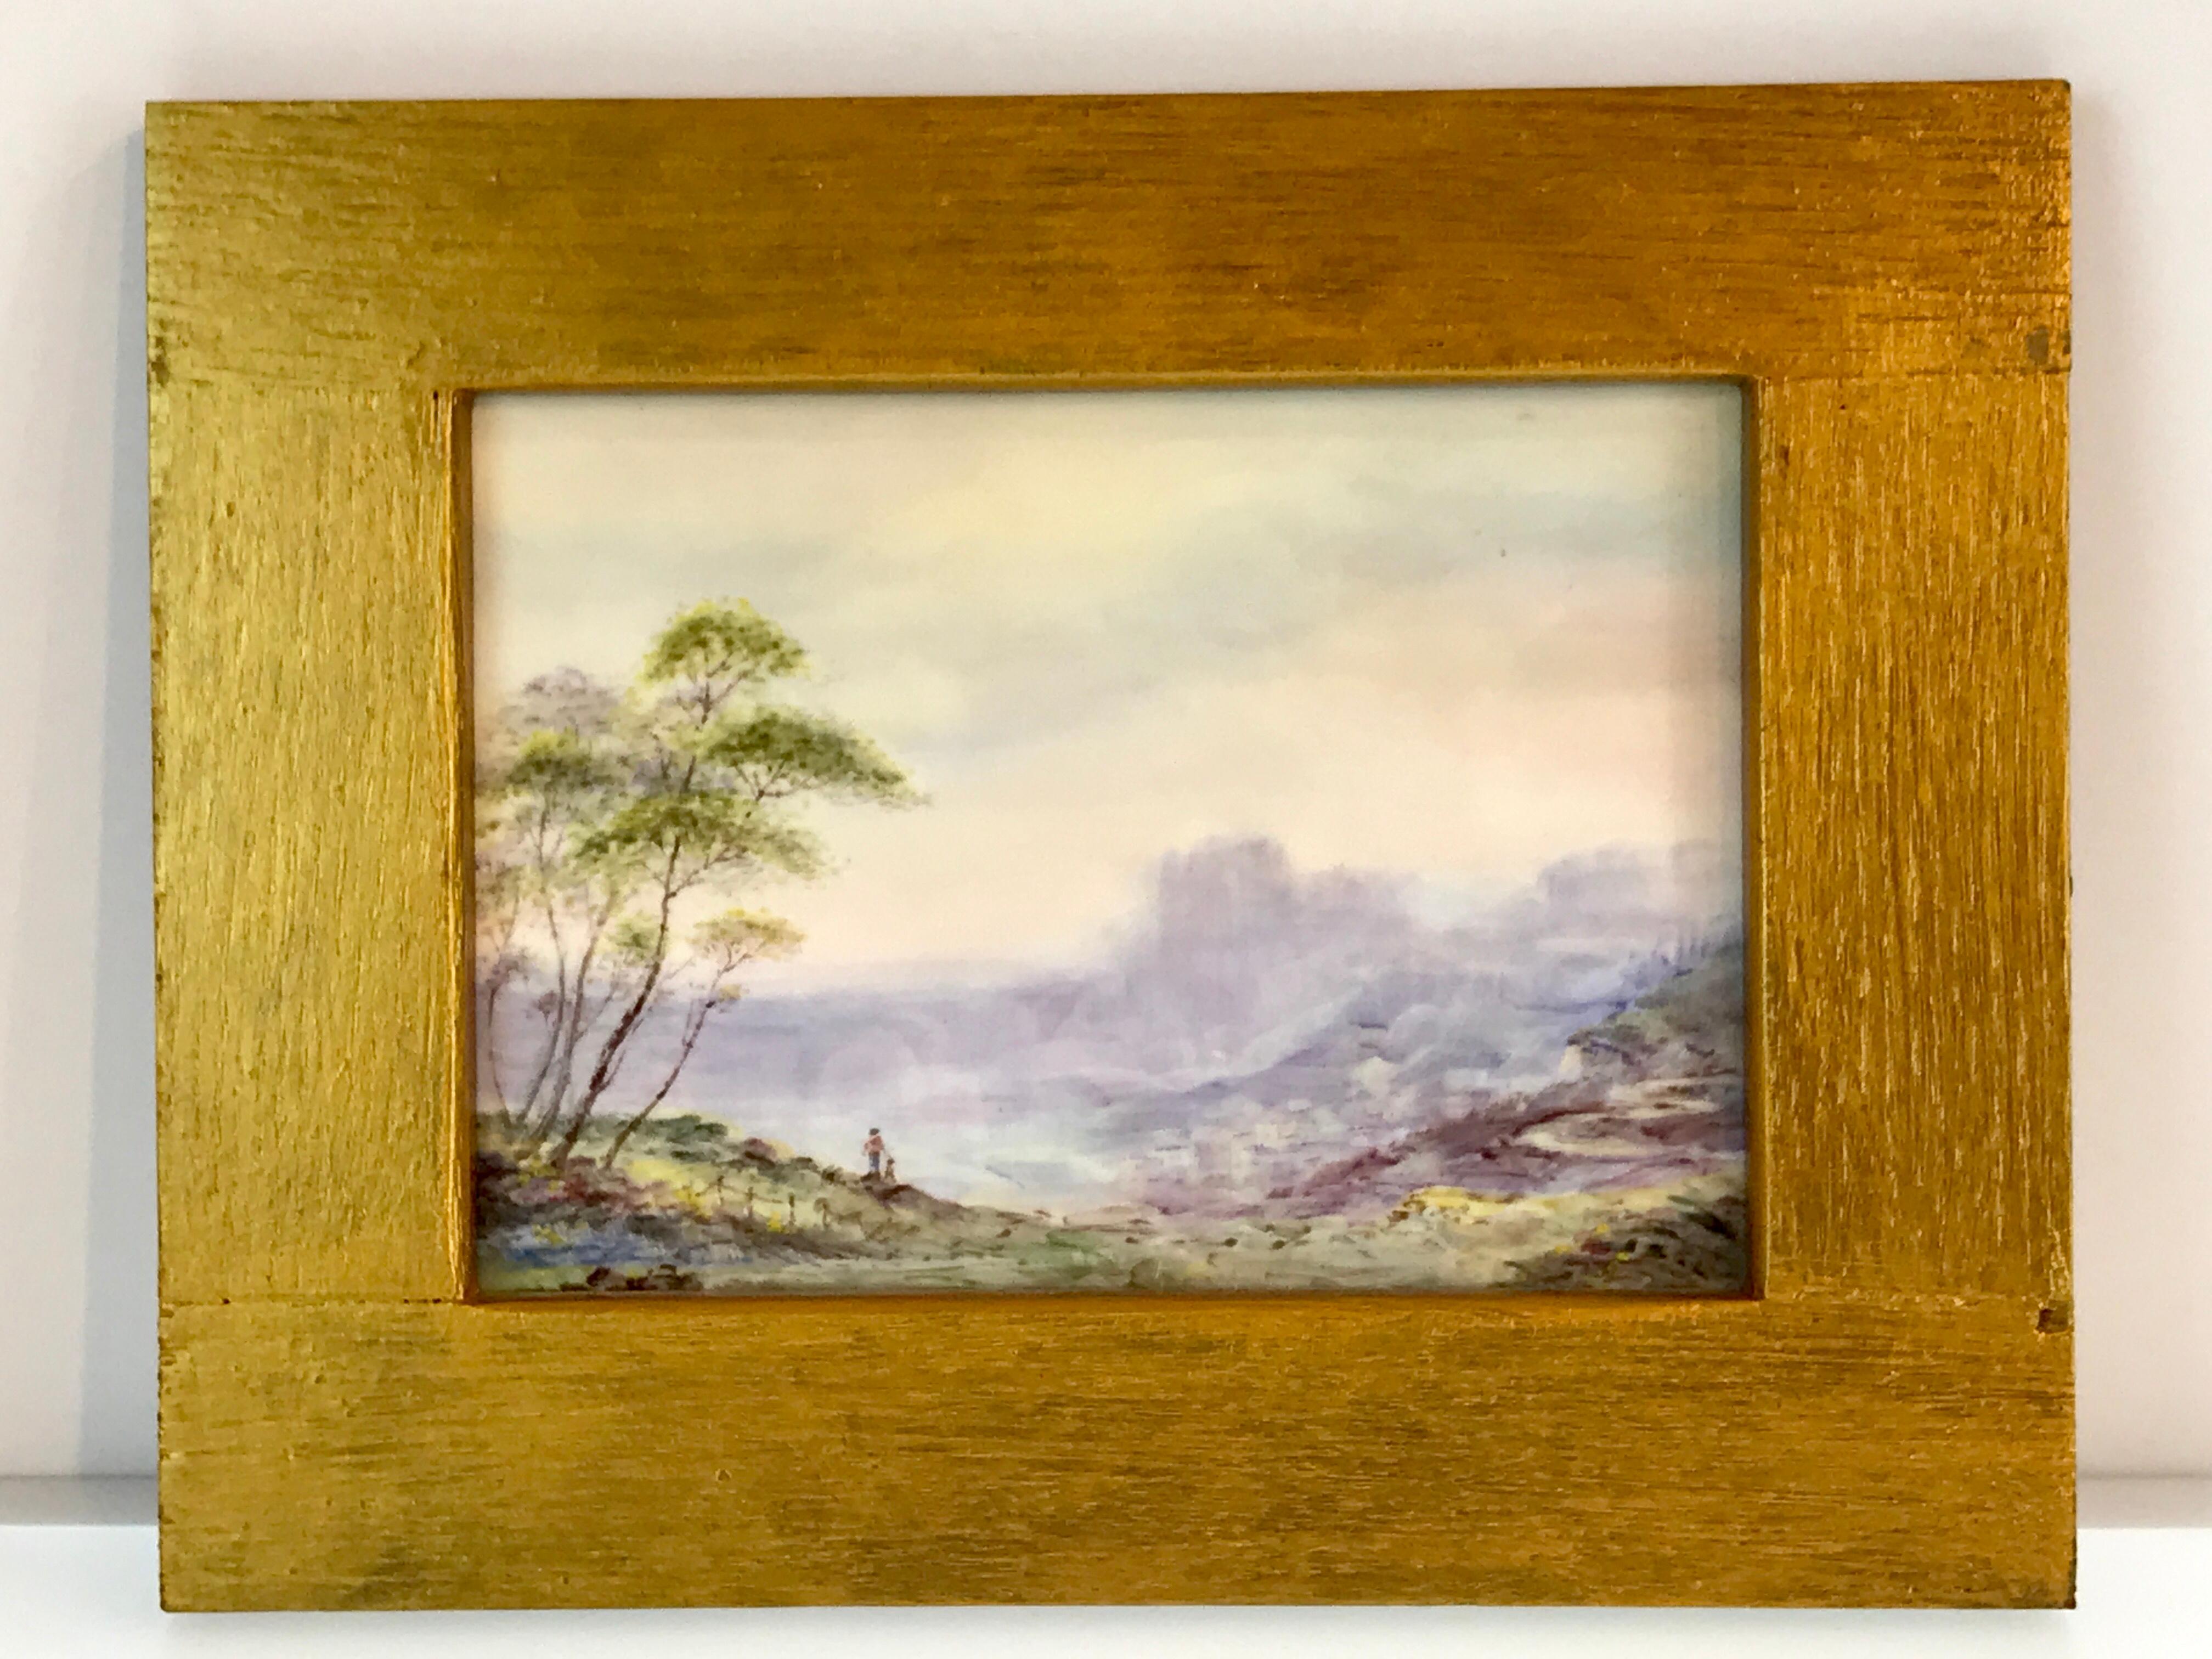 Royal Worcester (attributed) scenic plaque by Richard Lewis. Depicting figures in a landscape with castle, signed R. Lewis lower right, in a later gilt frame. The porcelain plaque measures 7.25